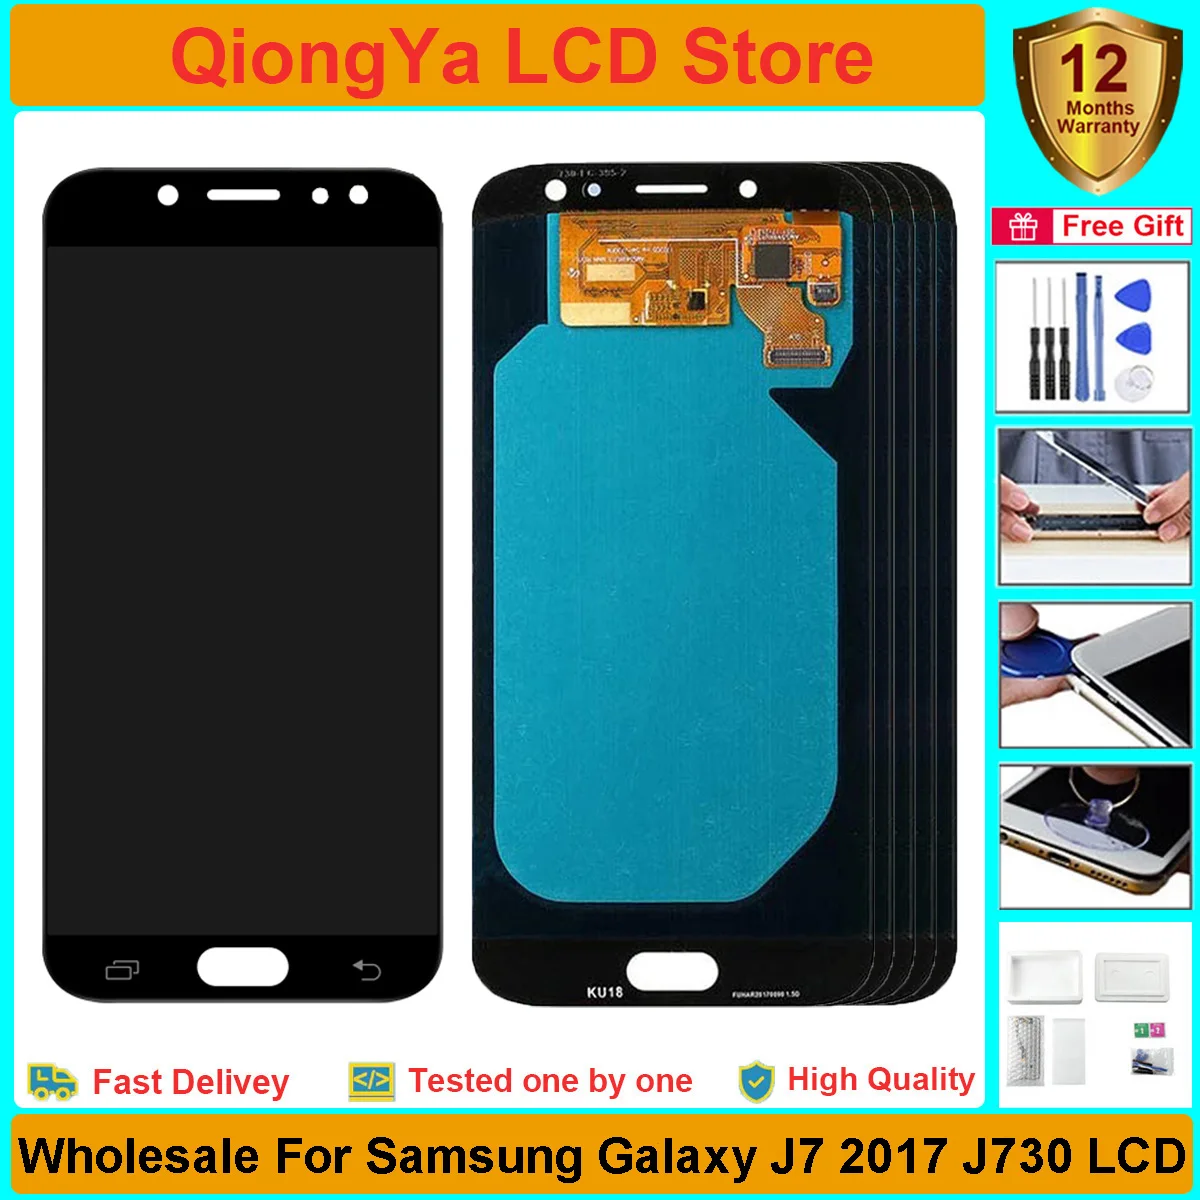 Enlarge Wholesale 3/5 Pieces LCD For Samsung Galaxy J7 Pro 2017 J730 SM-J730F J730FM J730G/DS Display + Touch Screen Digitizer Assembly